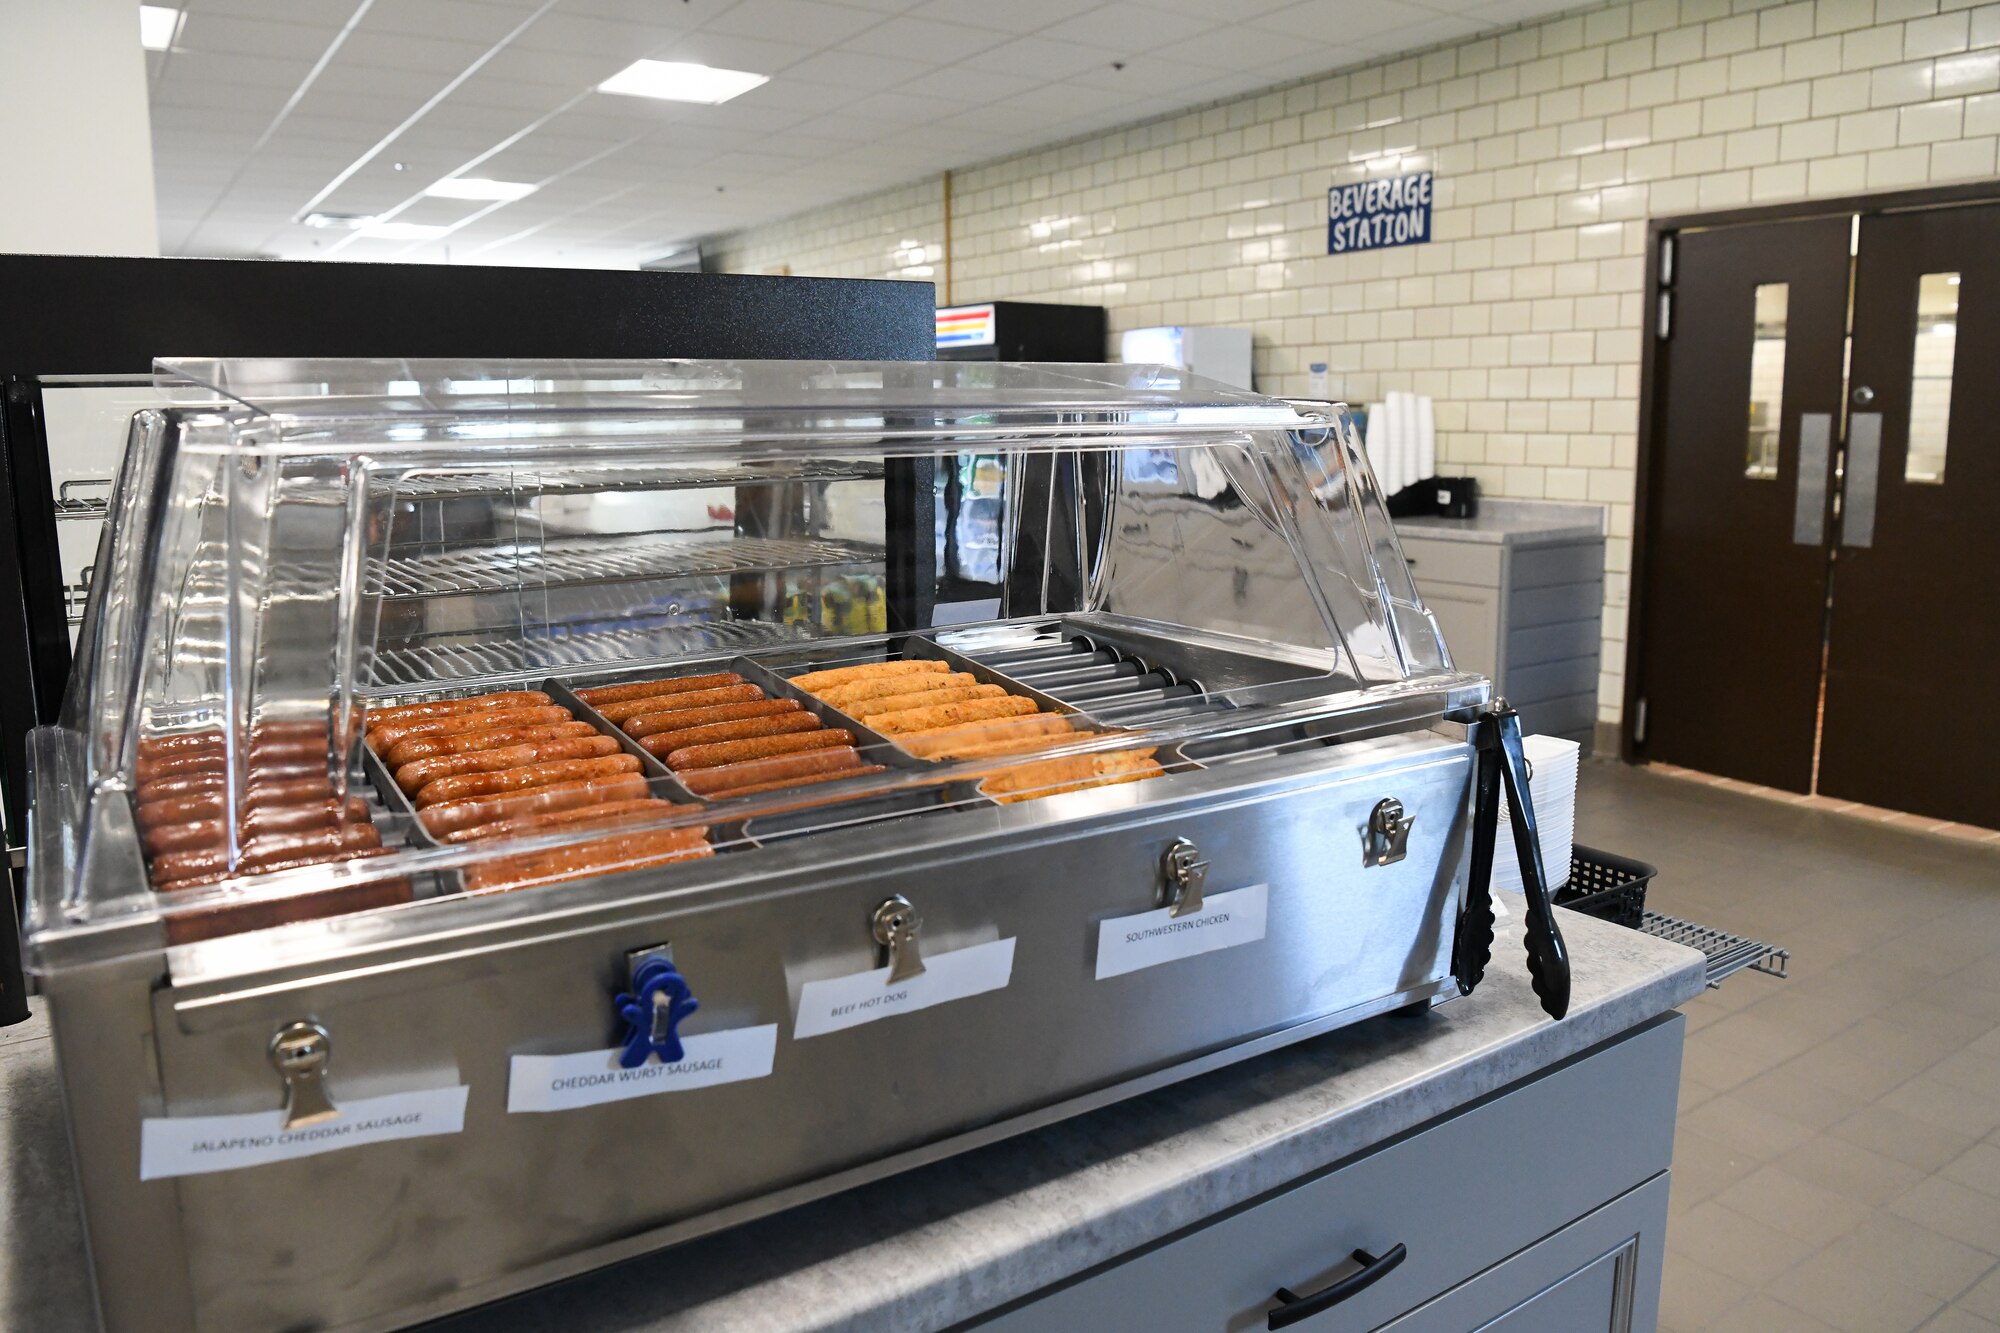 As part of the renovation of Café 100 in Building 100 at Arnold Air Force Base, Tenn., grab-and-go items were added, such as hot dogs. The dining facility reopened with a select portion of the menu Sept. 9, 2021. (U.S. Air Force photo by Jill Pickett)